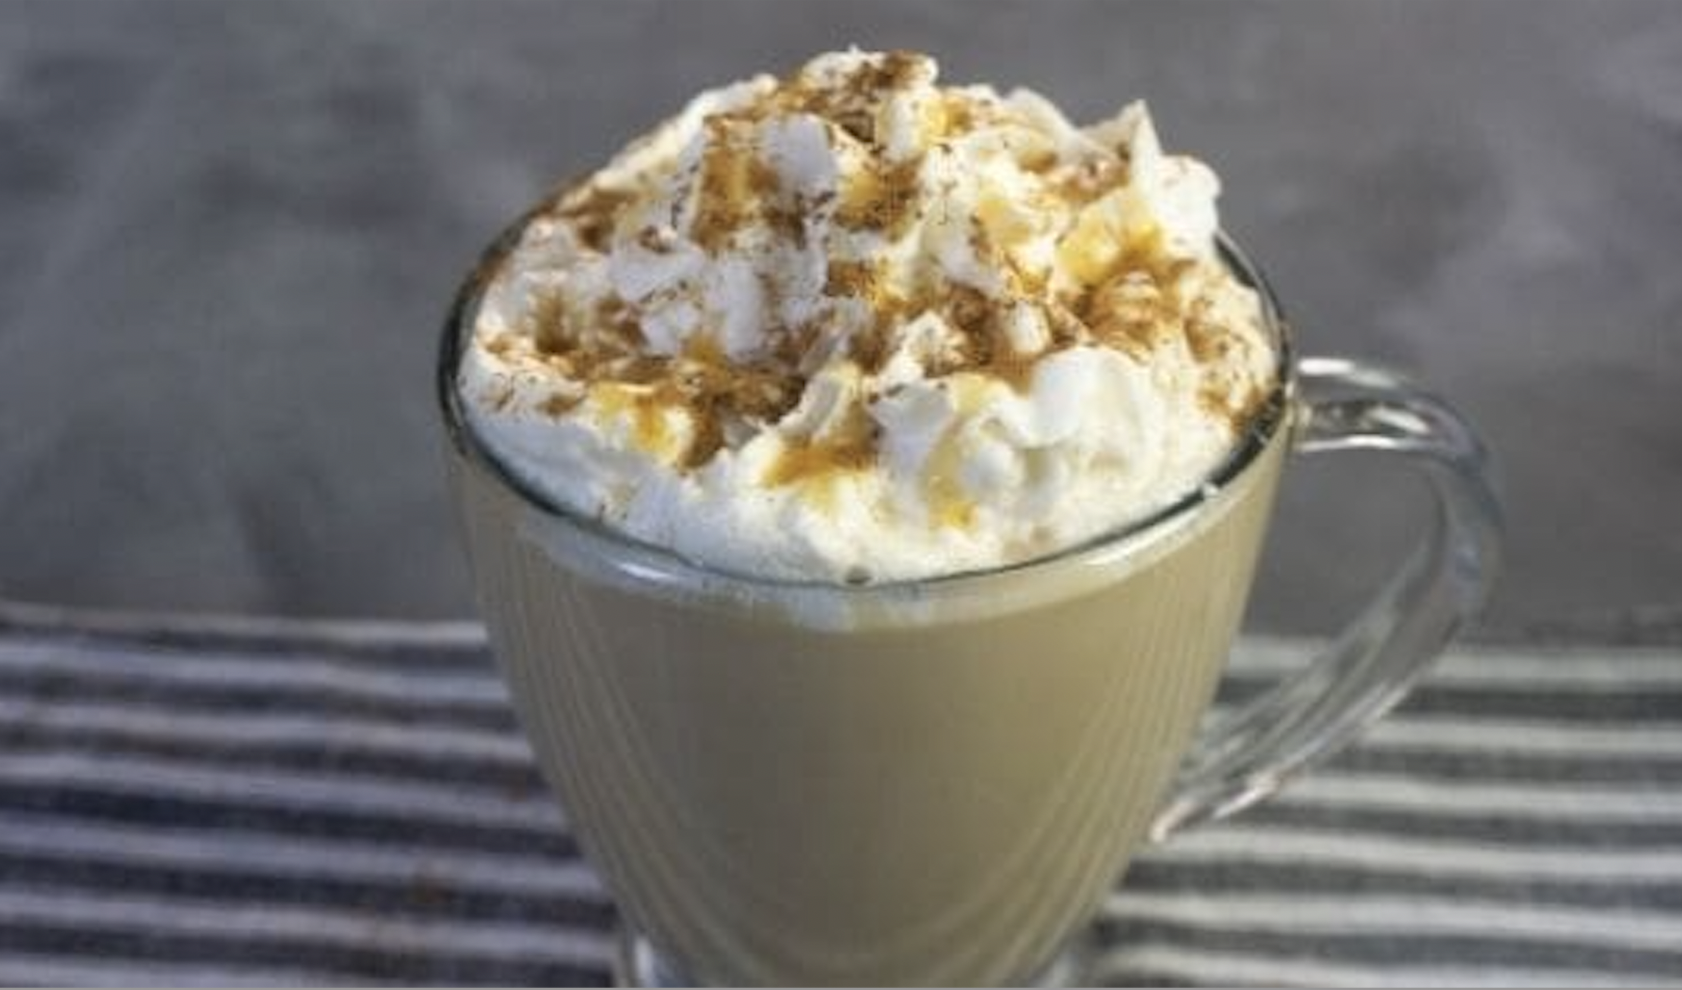 This drink combines all your favorite fall flavors in one delicious cup of coffee.<p><b><a href="https://champagneandcoconuts.com/pumpkin-creme-brulee-latte/">Get recipe</a></b></p>